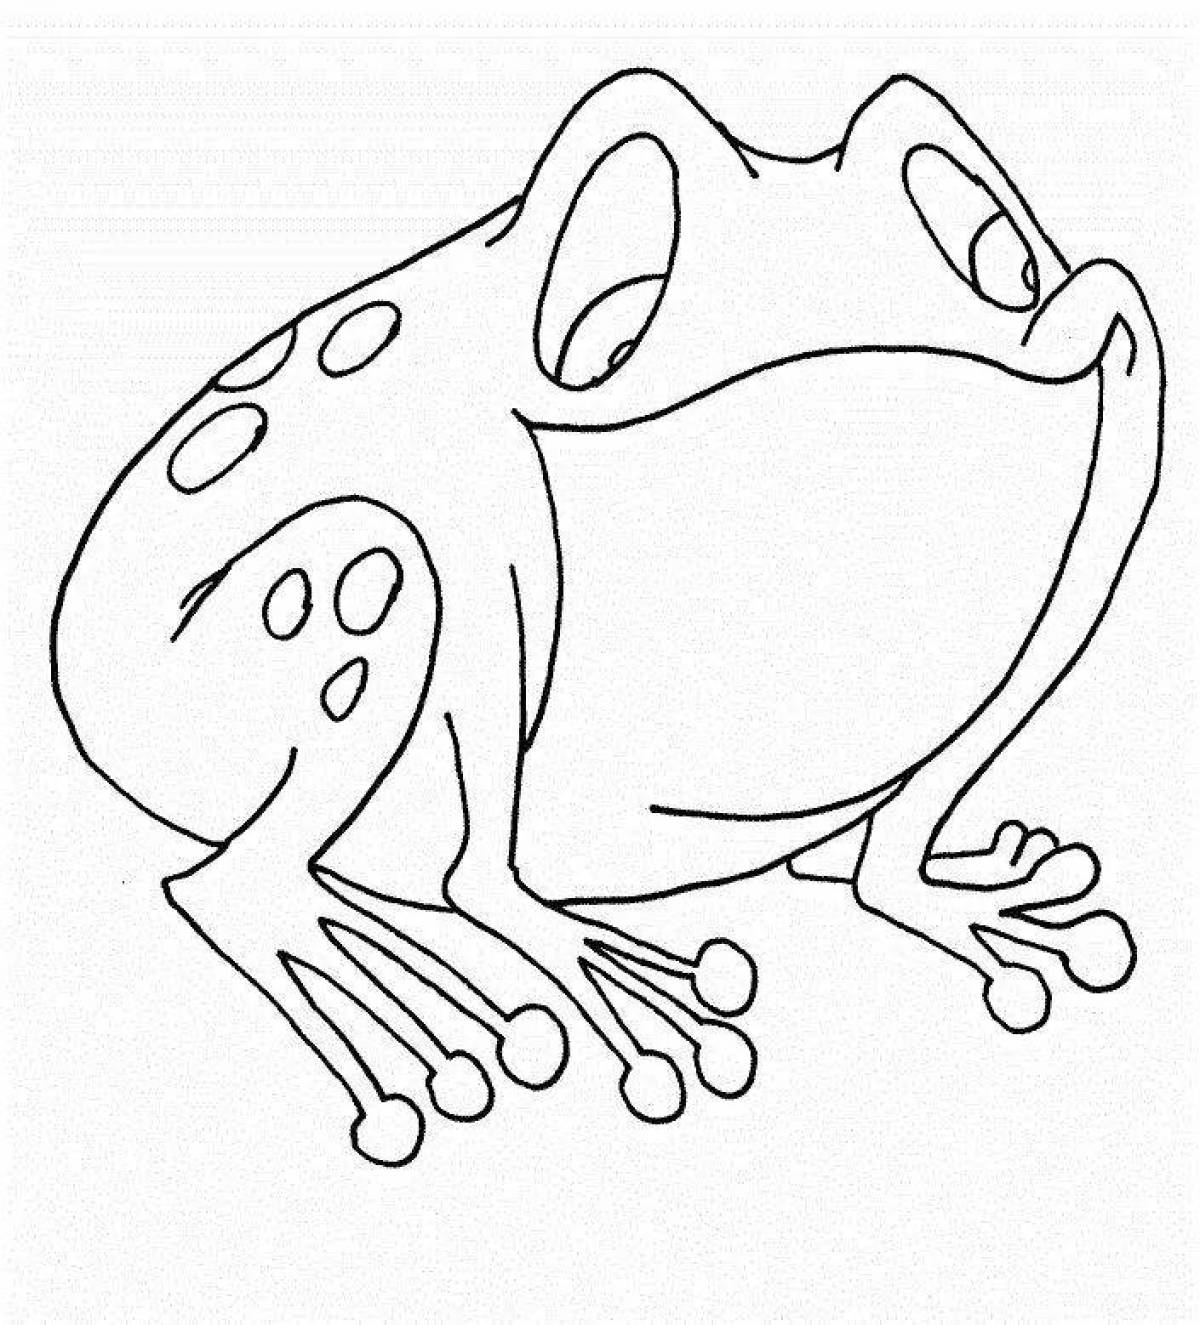 Coloring for a bright toad and a rose